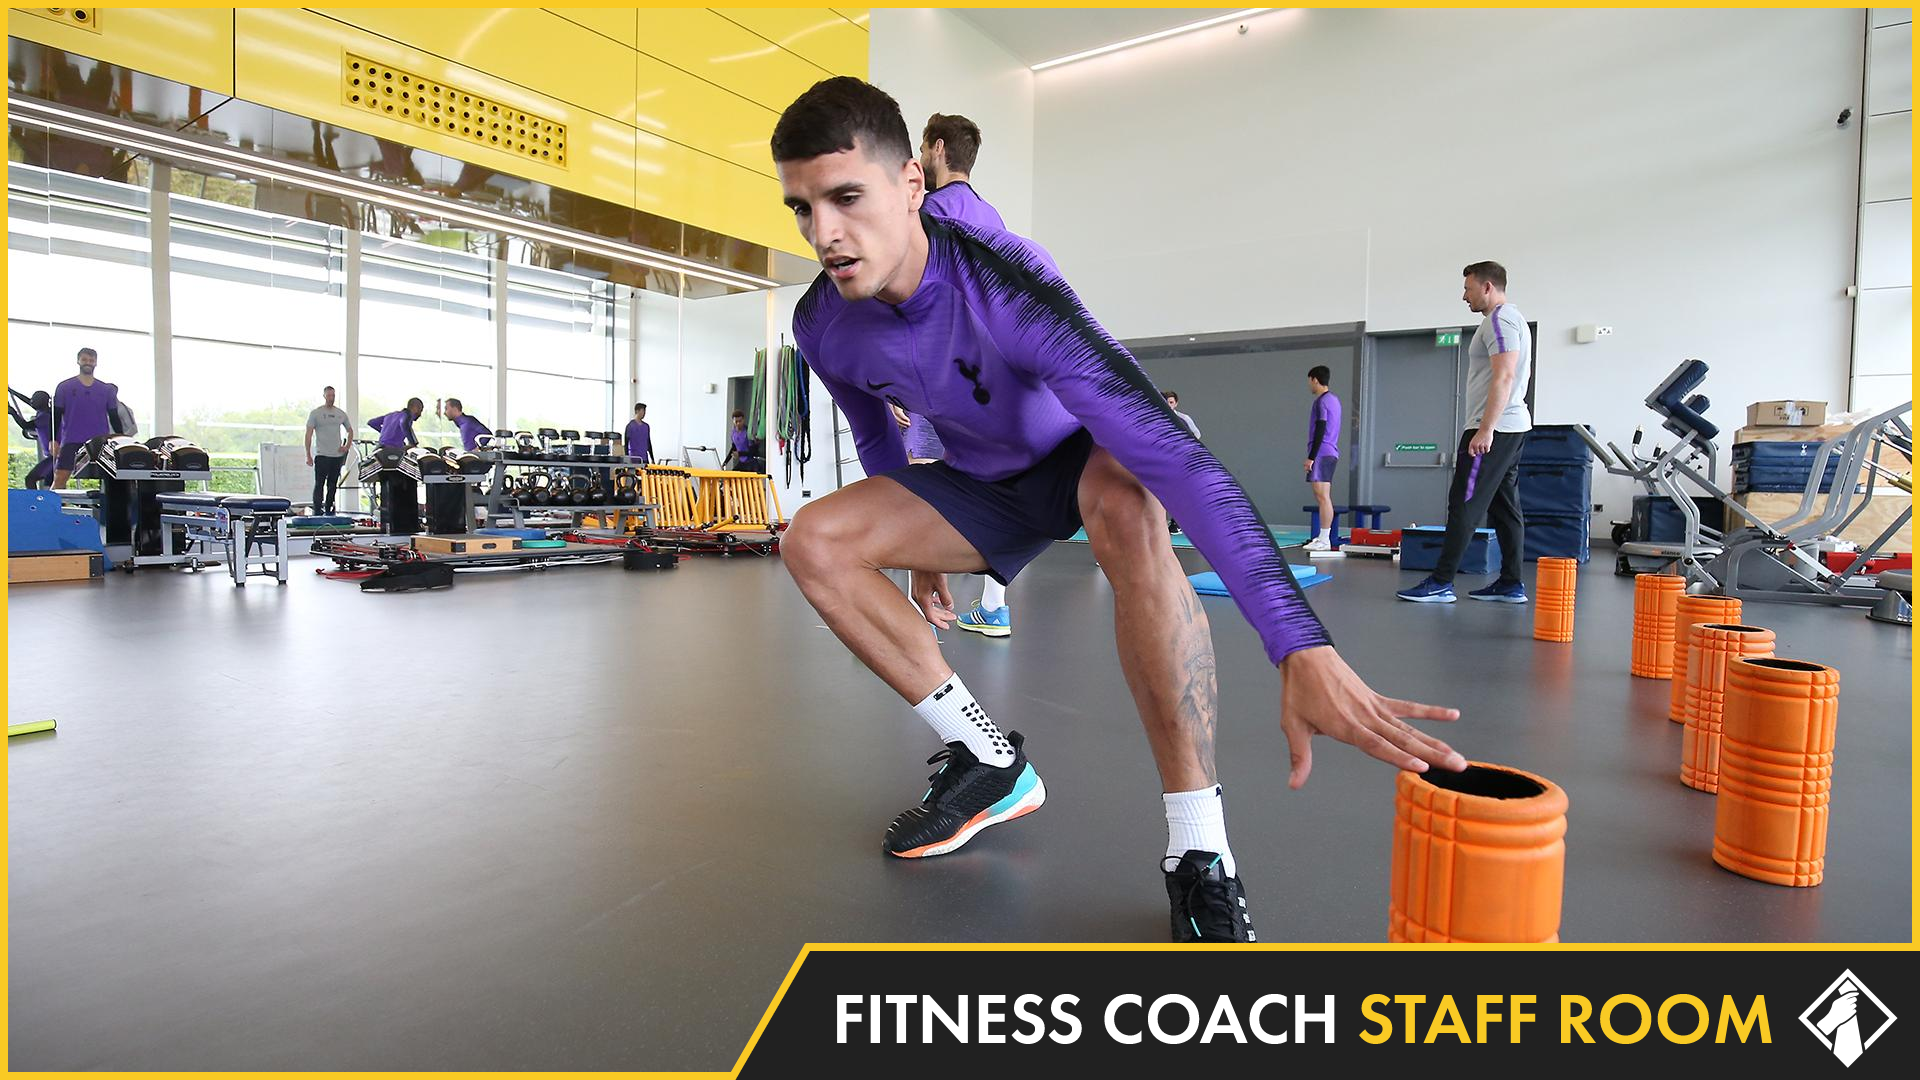 FM21: What makes a good Fitness Coach?